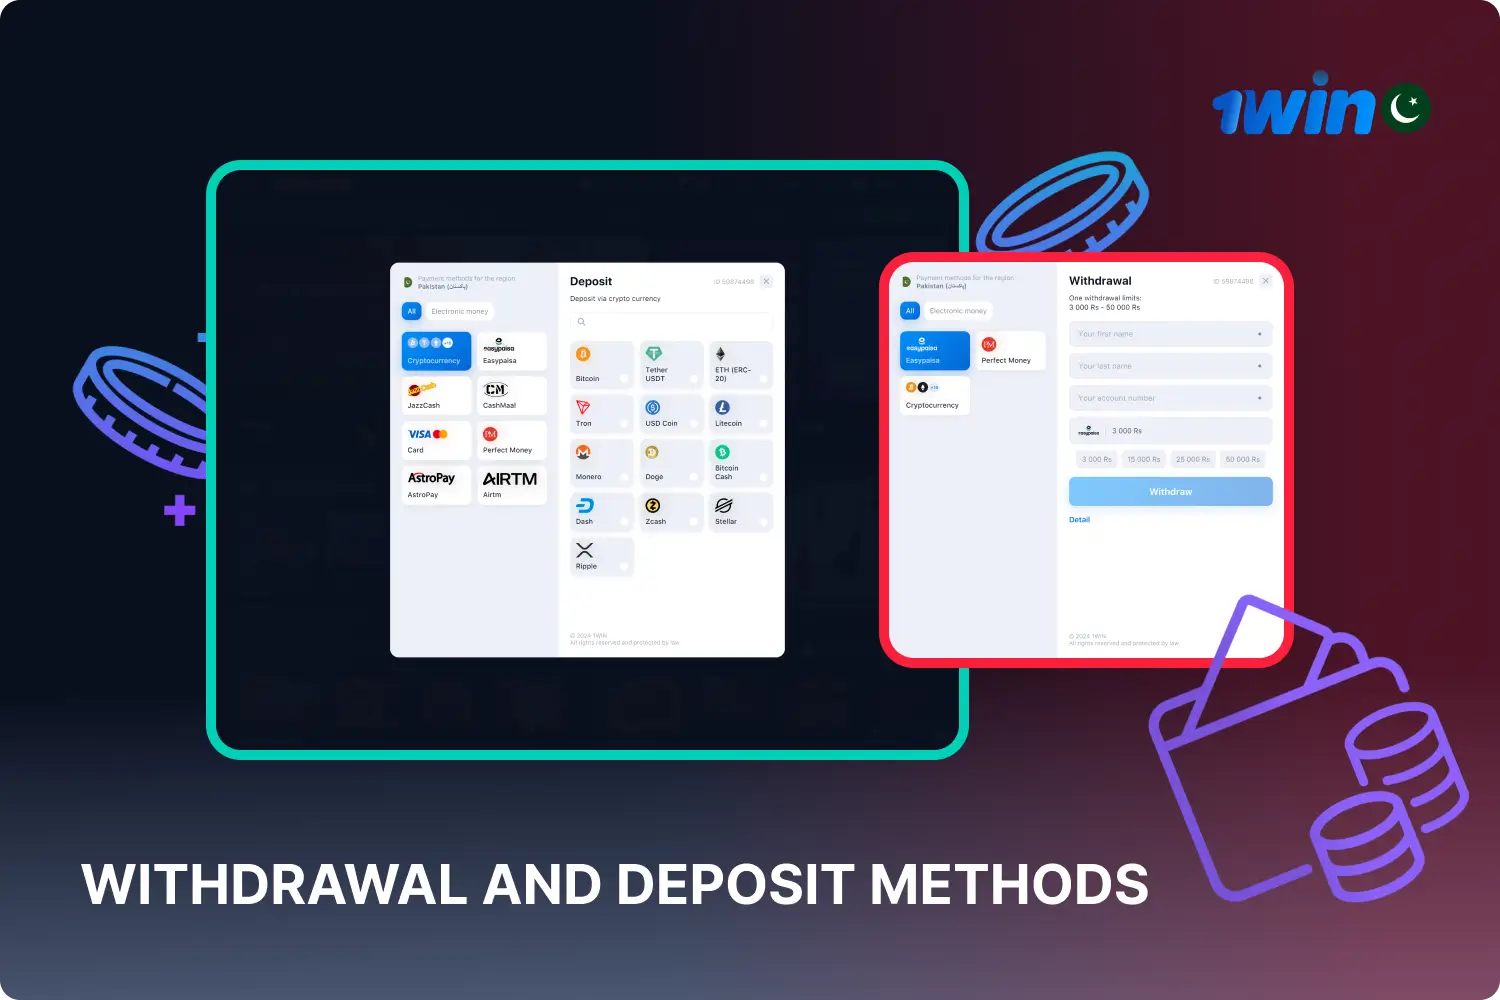 The simple and fast deposit and withdrawal methods are particularly attractive to users of the 1win platform